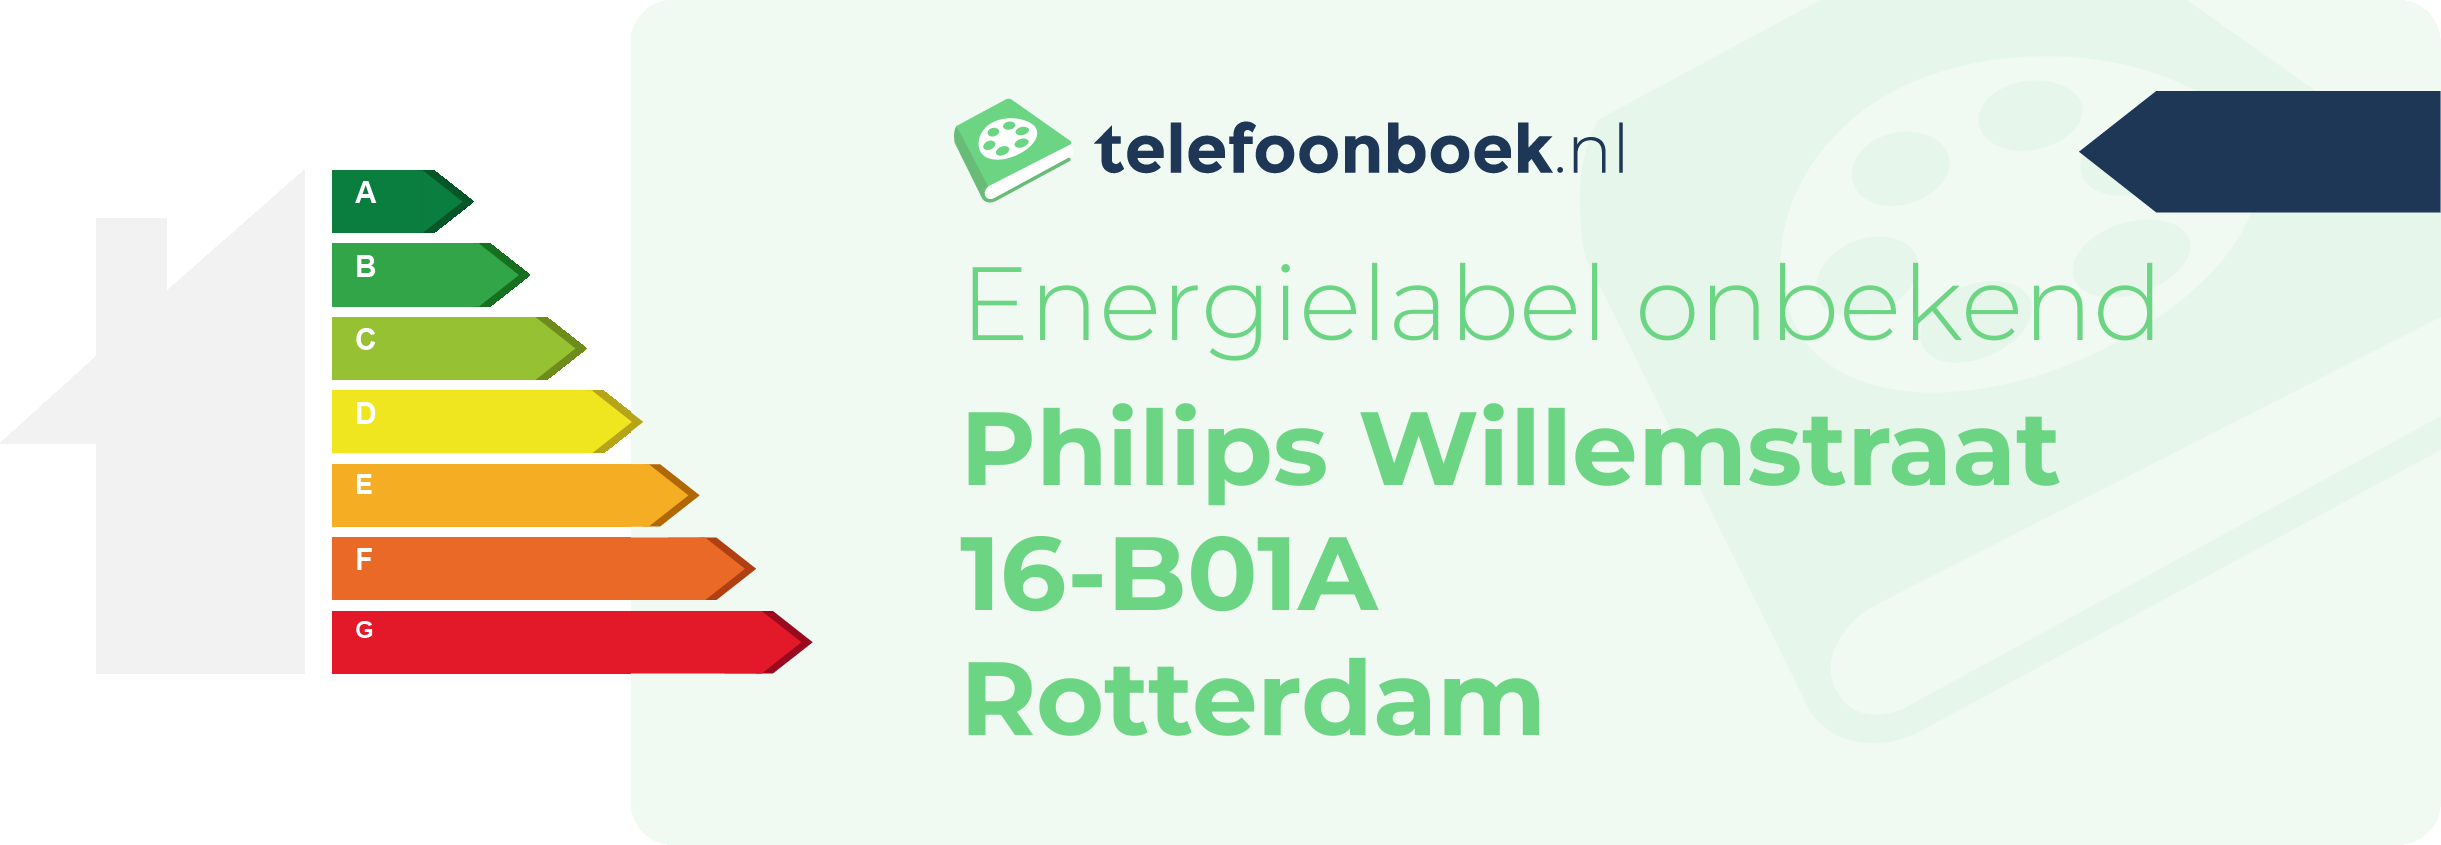 Energielabel Philips Willemstraat 16-B01A Rotterdam